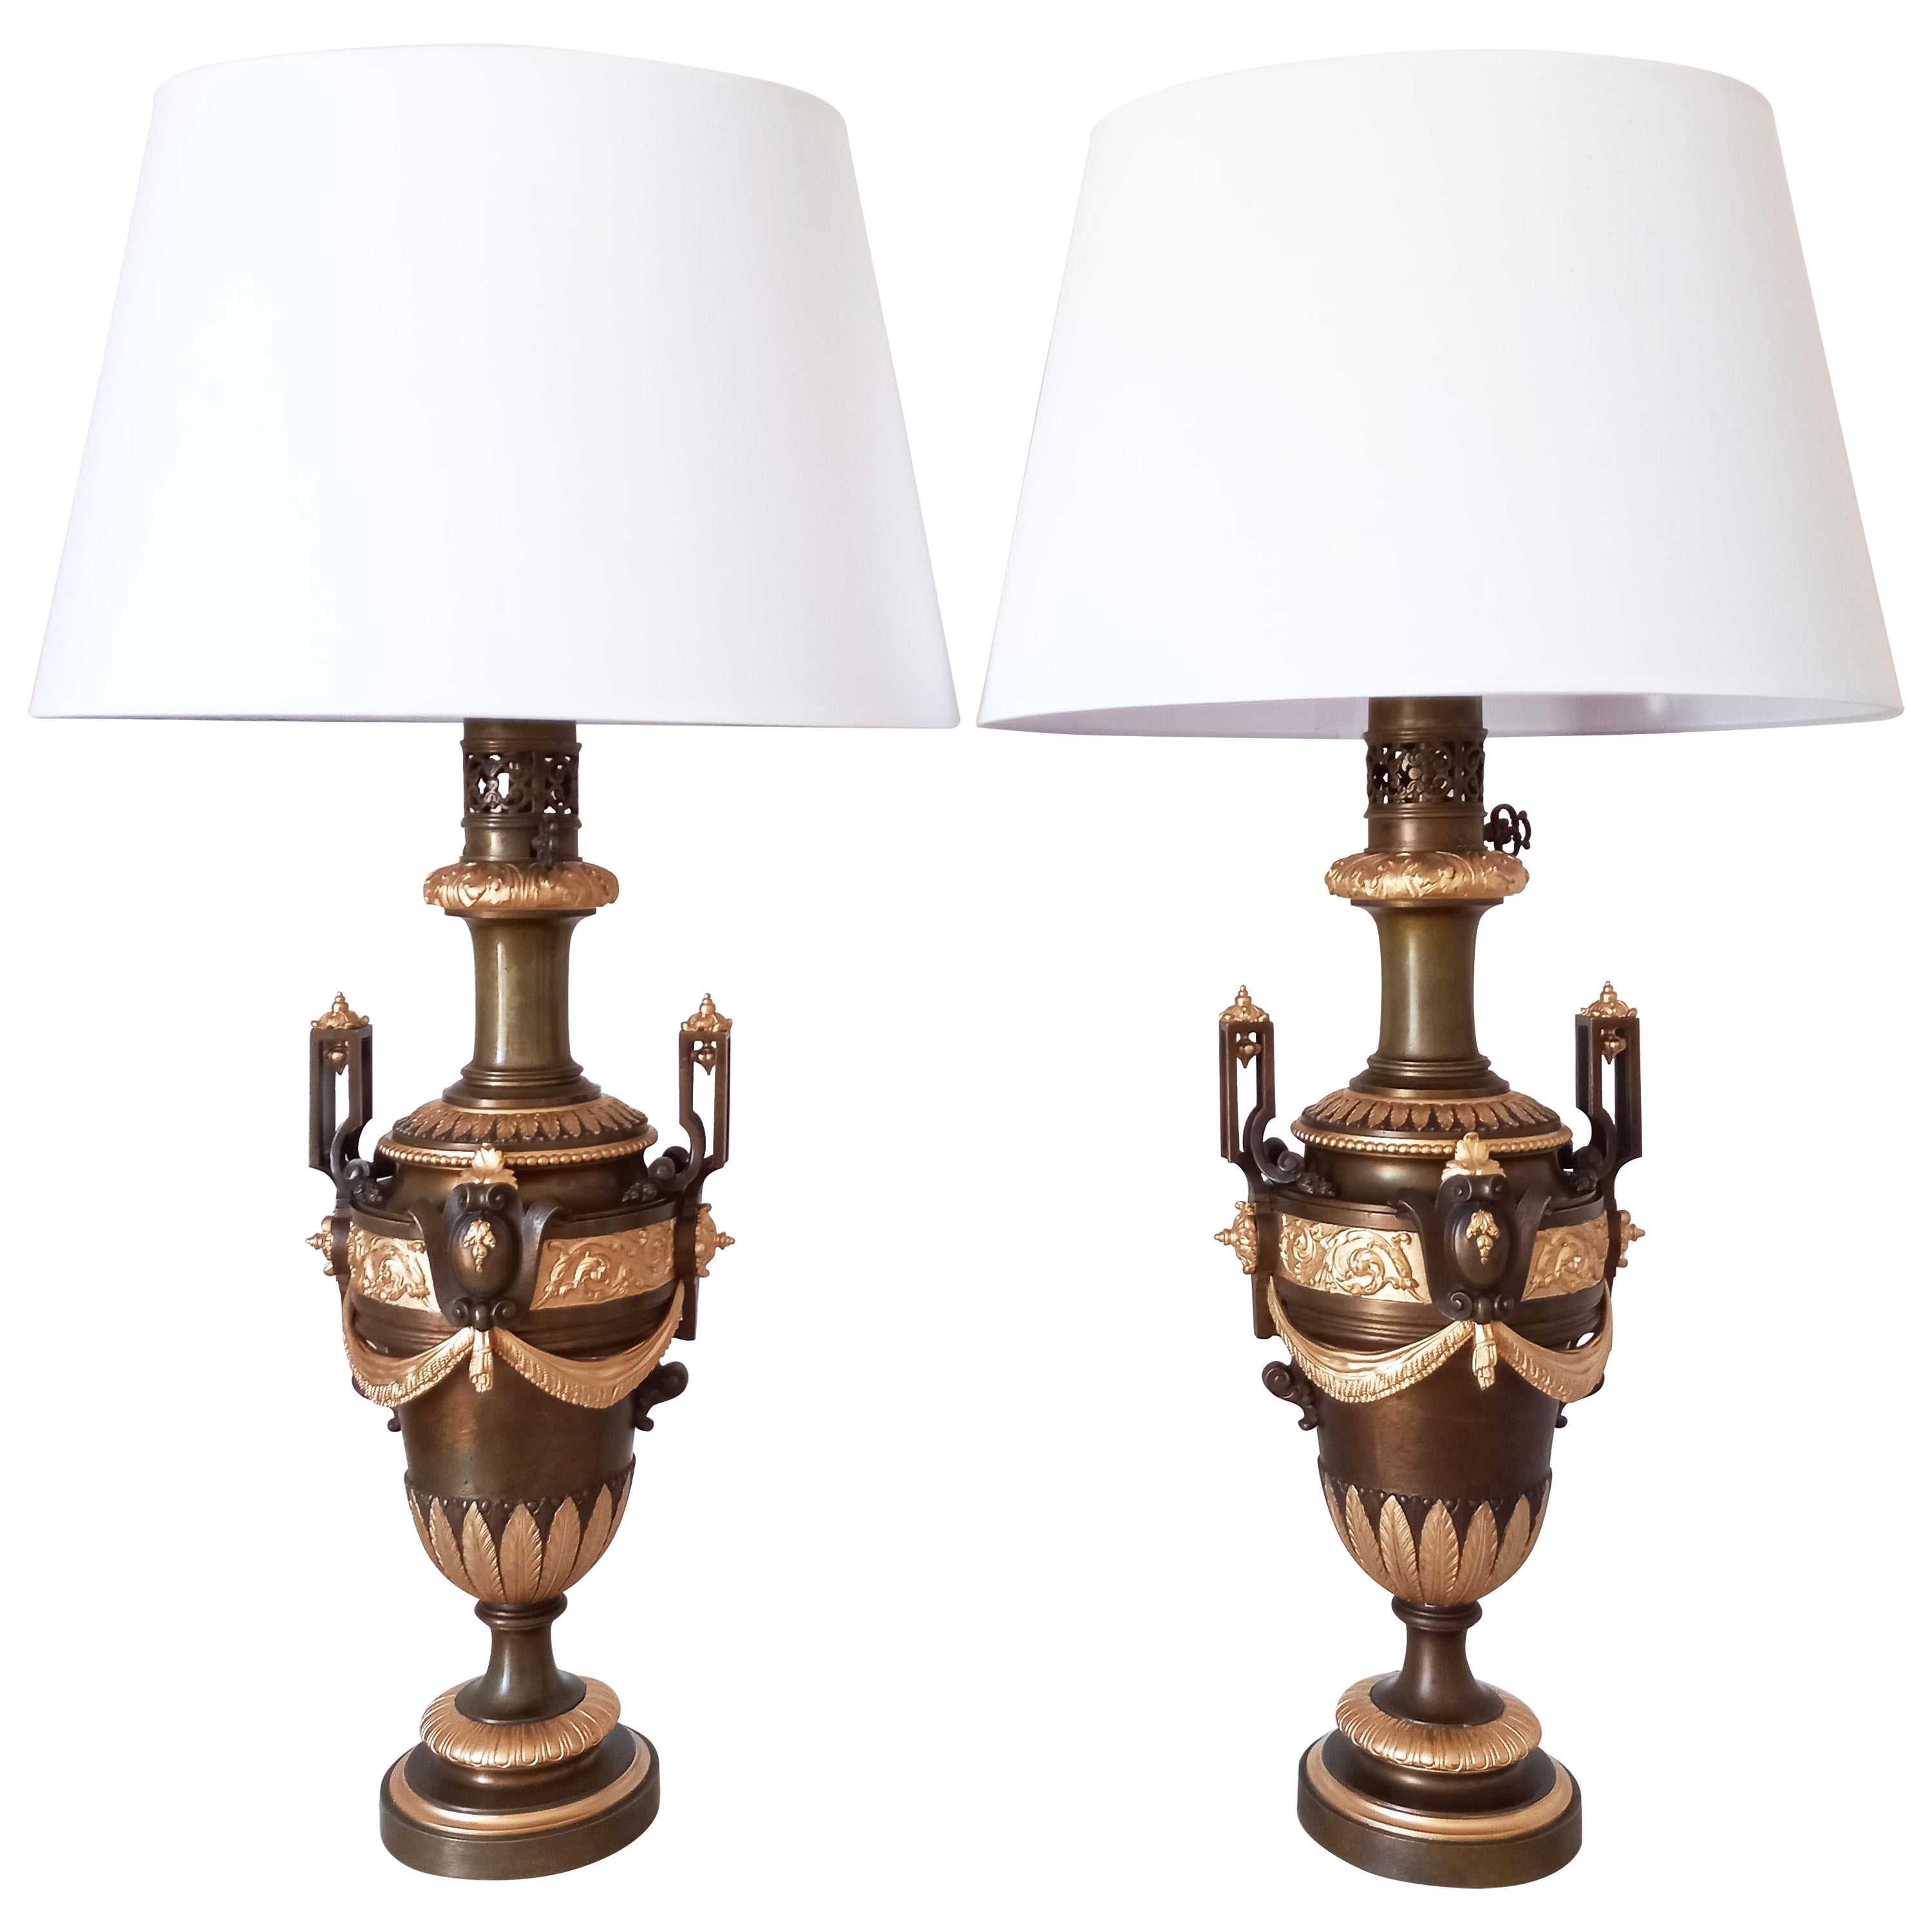 Pair of antique style bronze lamps, France 19th century For Sale